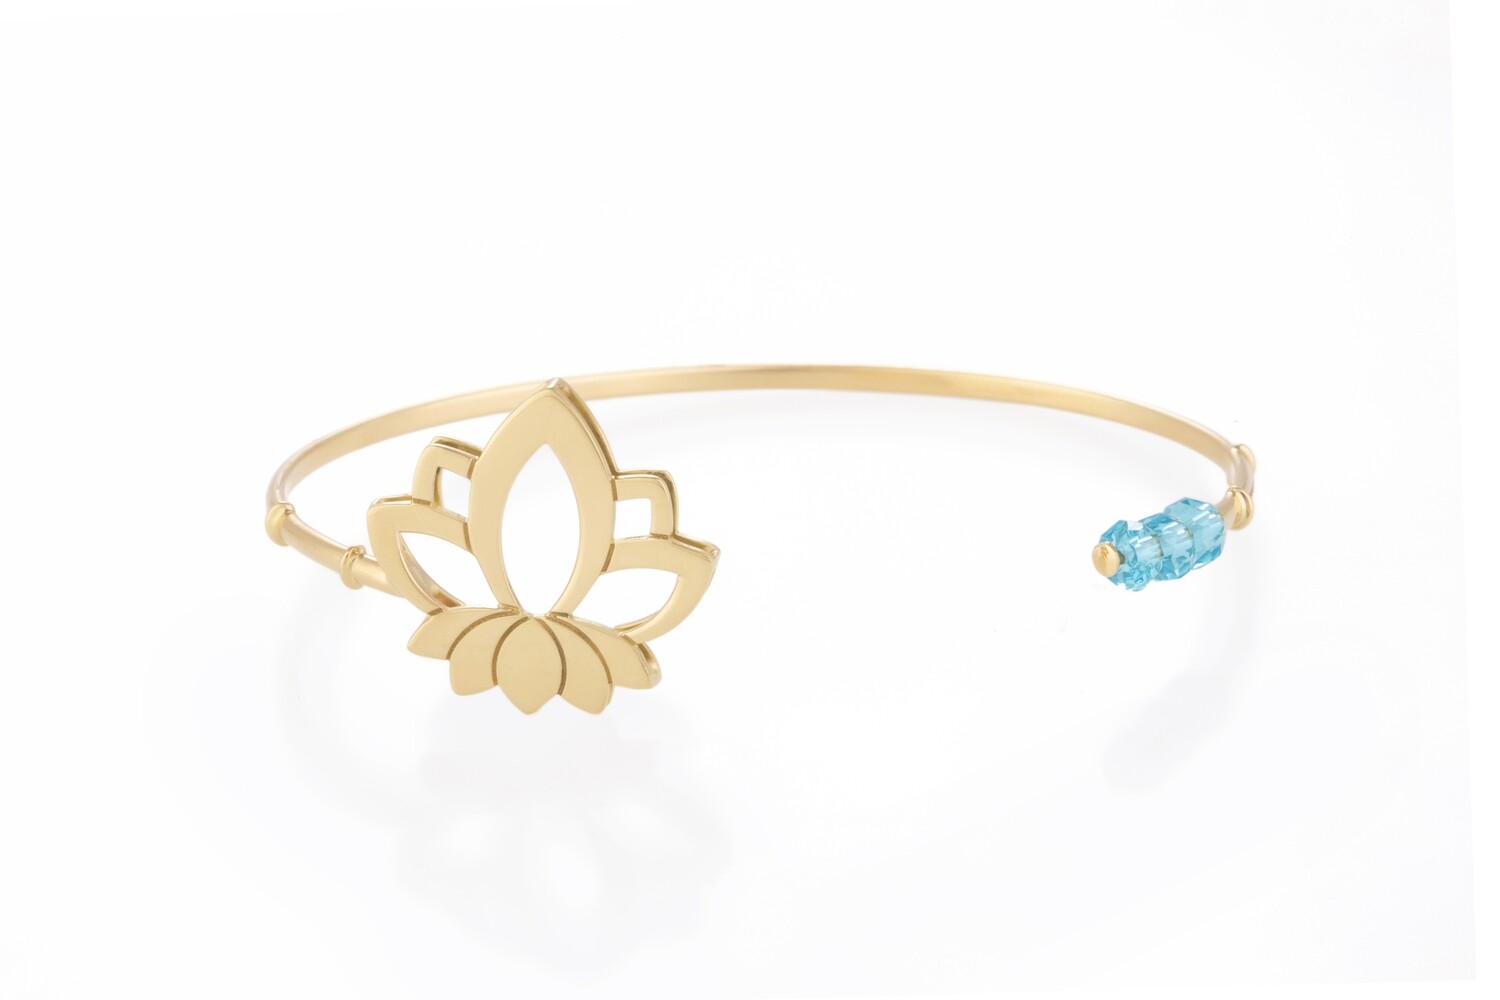 Lotus Gold Bracelet with Colored Stones